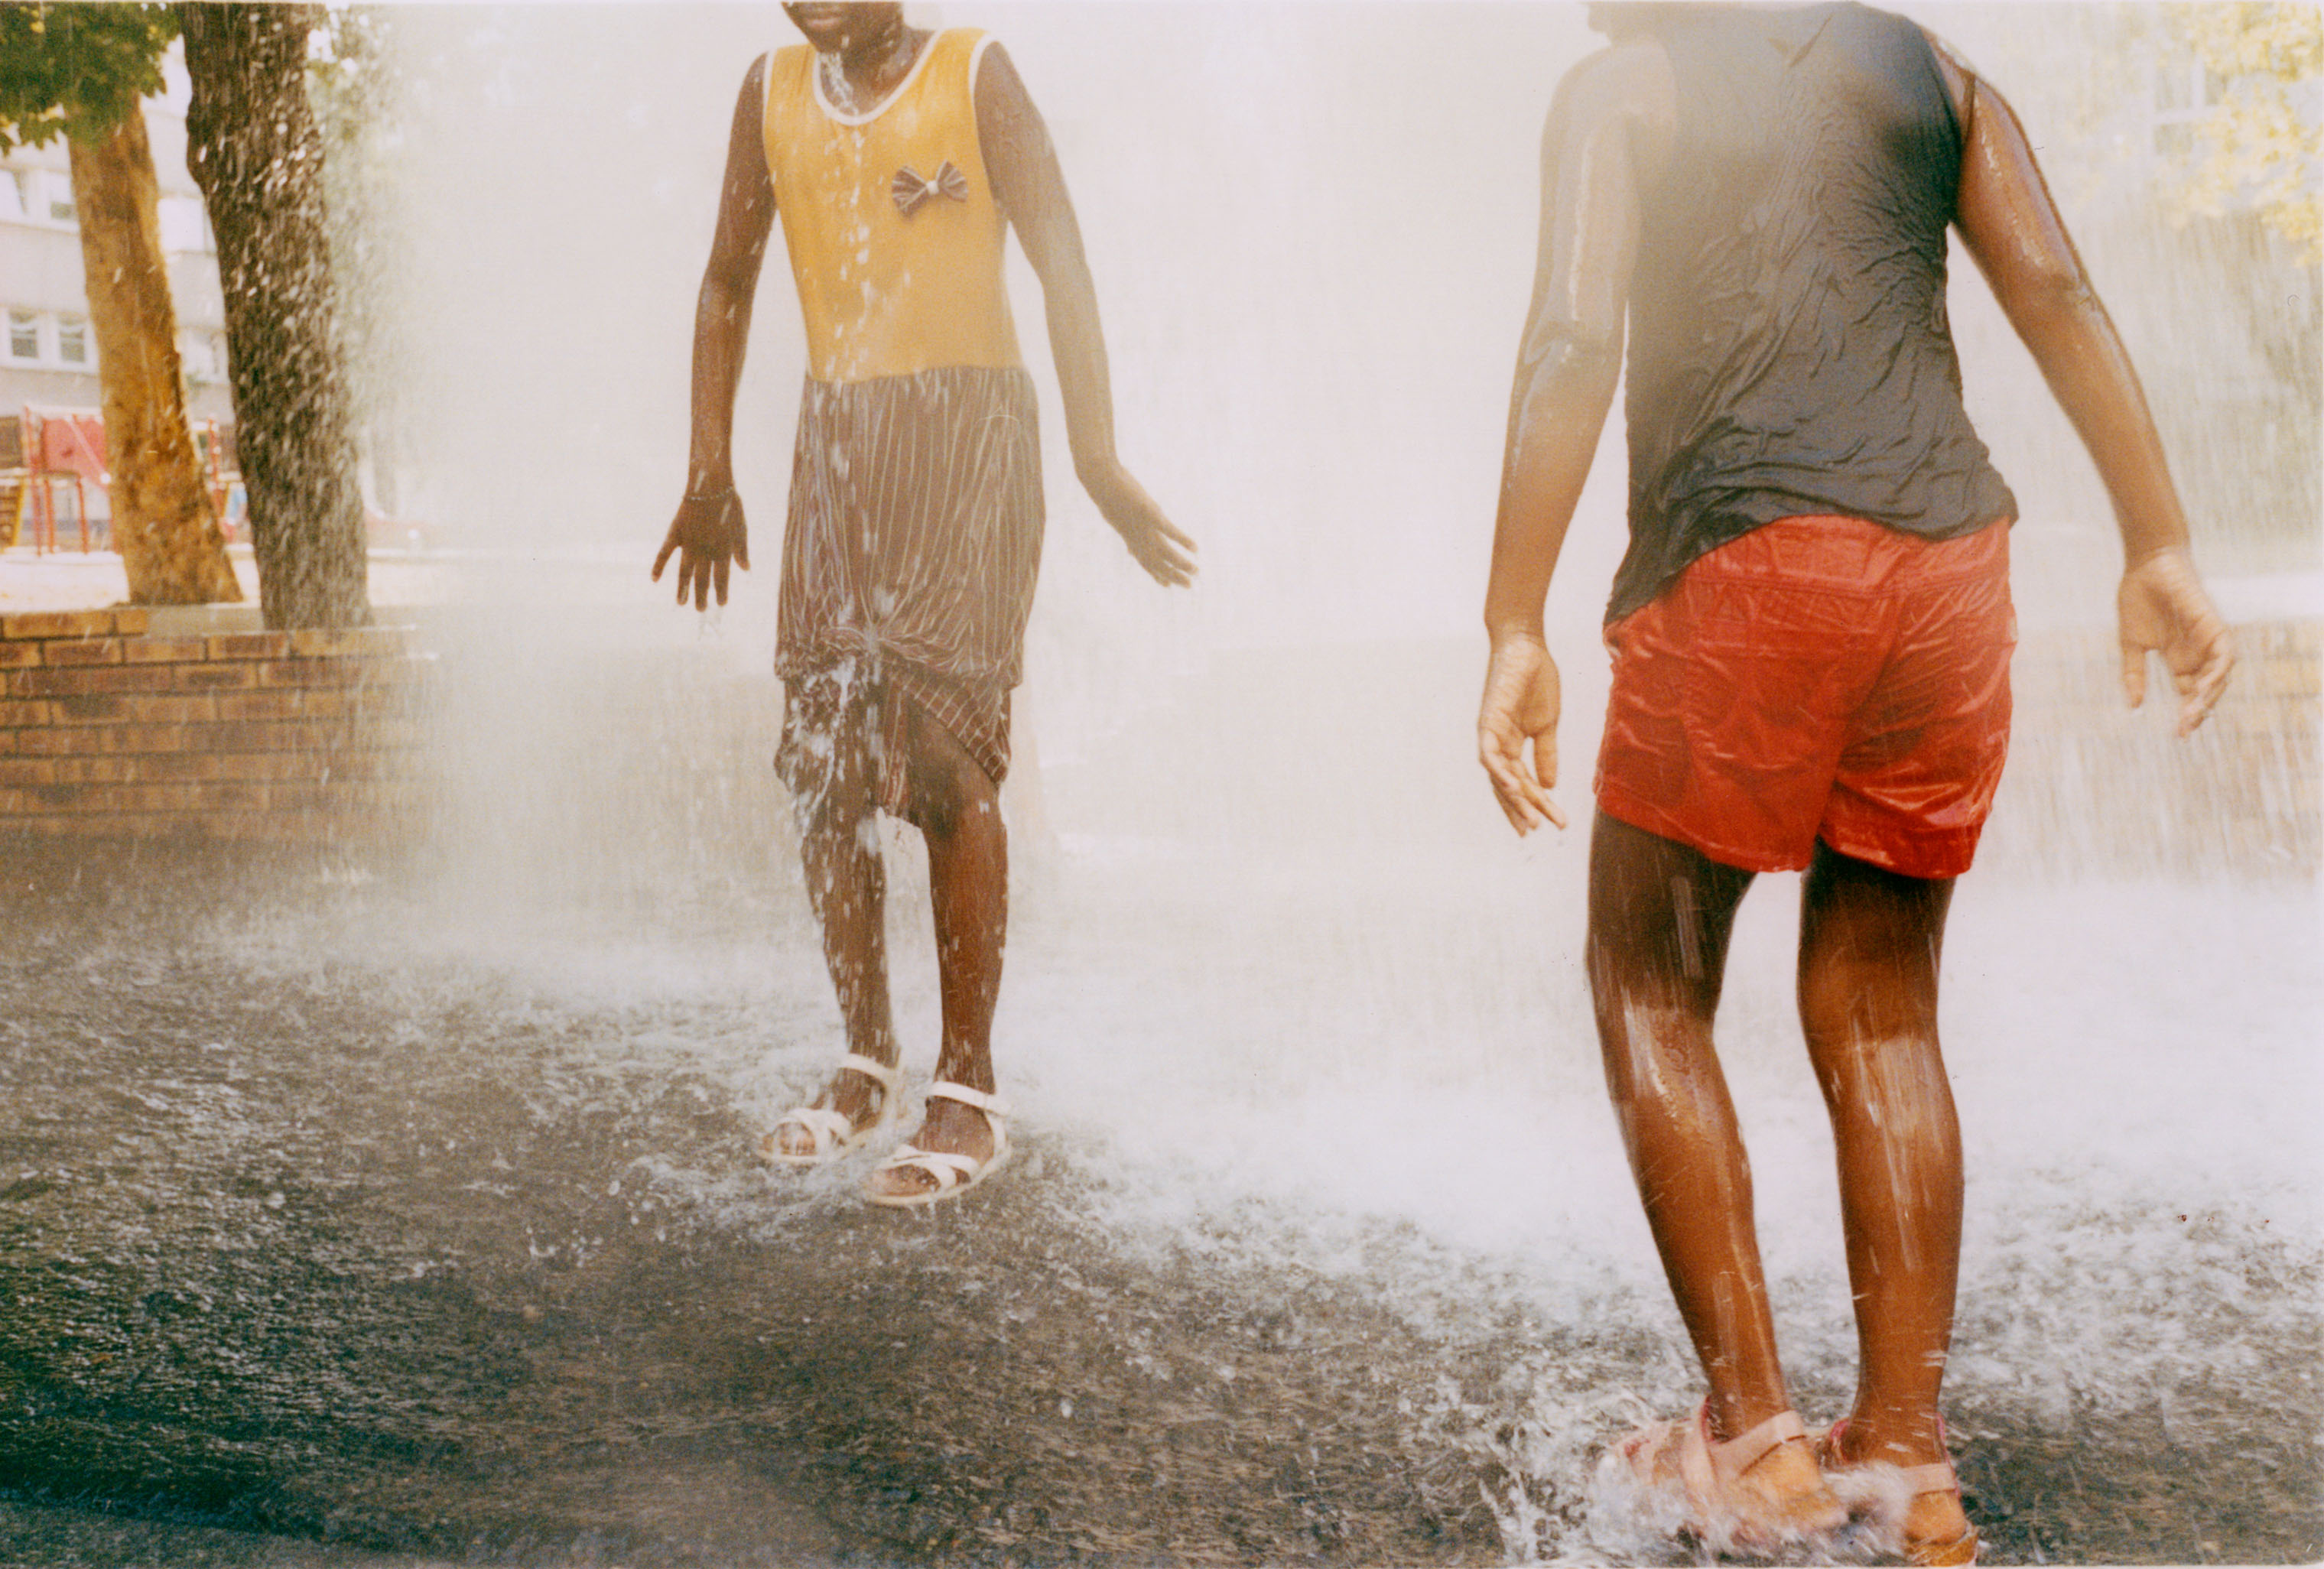 Kids keeping cool in my street during the heatwave. From my ongoing project *Paris Nord*, documenting my local neighbourhood in the suburb of Seine Saint Denis, which can be viewed in its entirety in the *Studies* section of this website. - © Maciek Pożoga